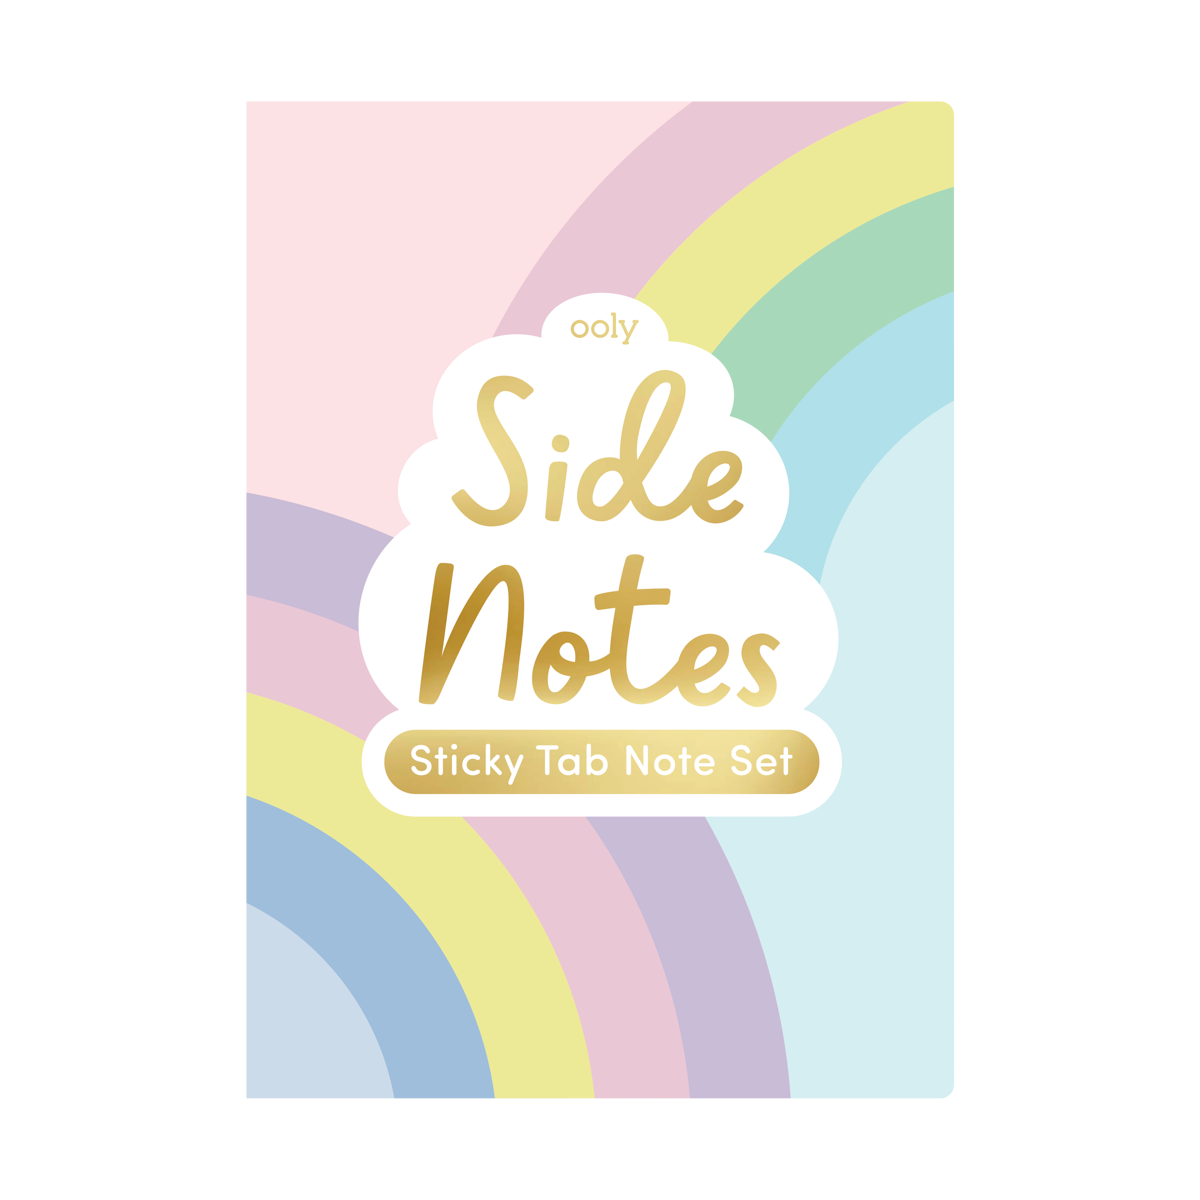 Transparent See-Through Sticky Notes Set Pastel Colours 6 pads x